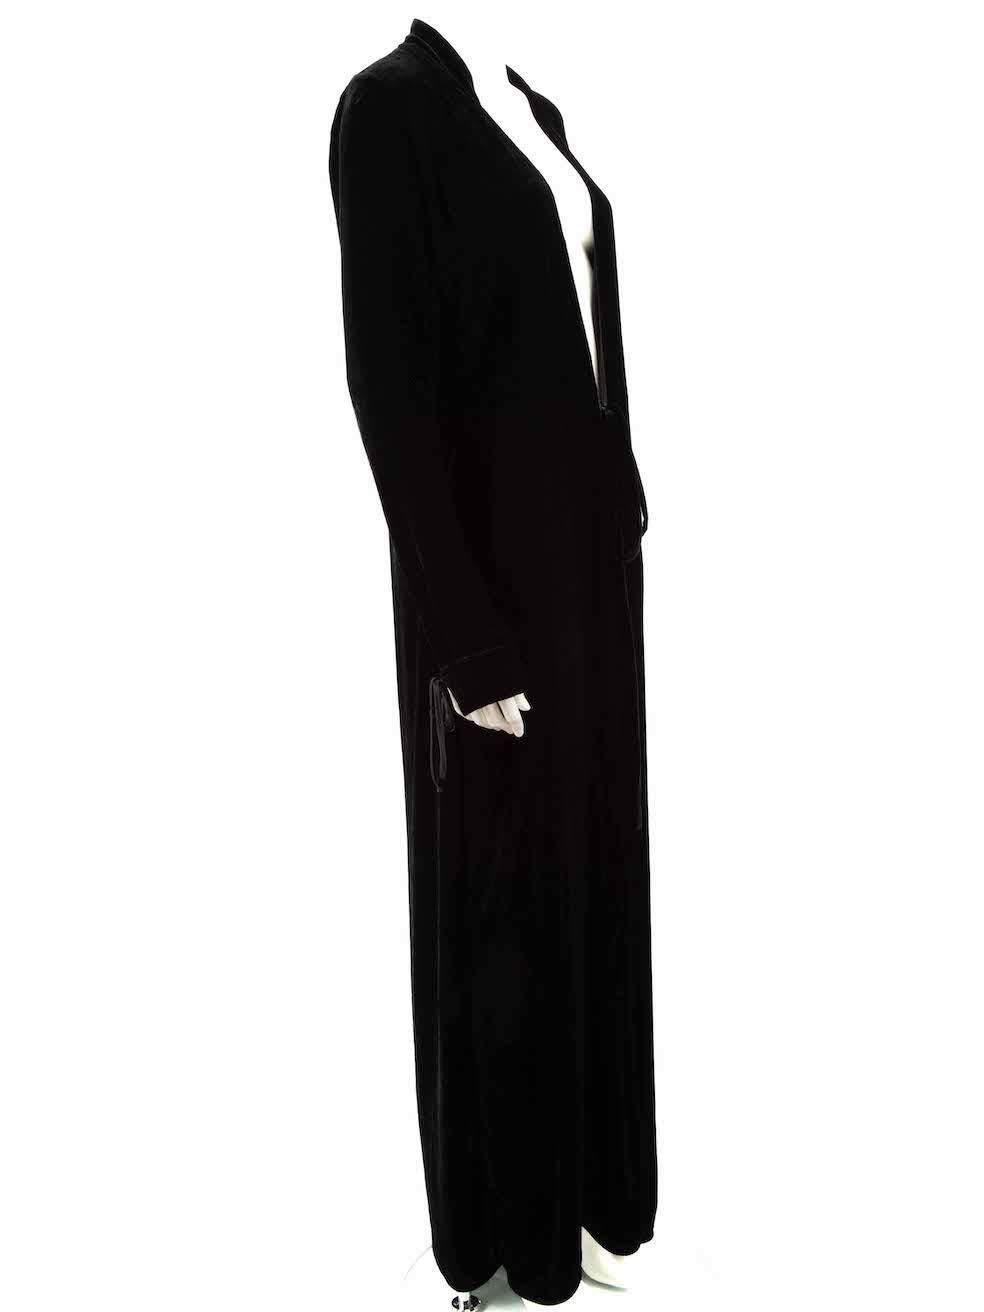 CONDITION is Very good. Minimal wear to coat is evident. Minimal pilling to interior lining. One side of the brand label has come unstitched on this used The Attico designer resale item.
 
 
 
 Details
 
 
 Black
 
 Velvet
 
 Nightgown
 
 Tie